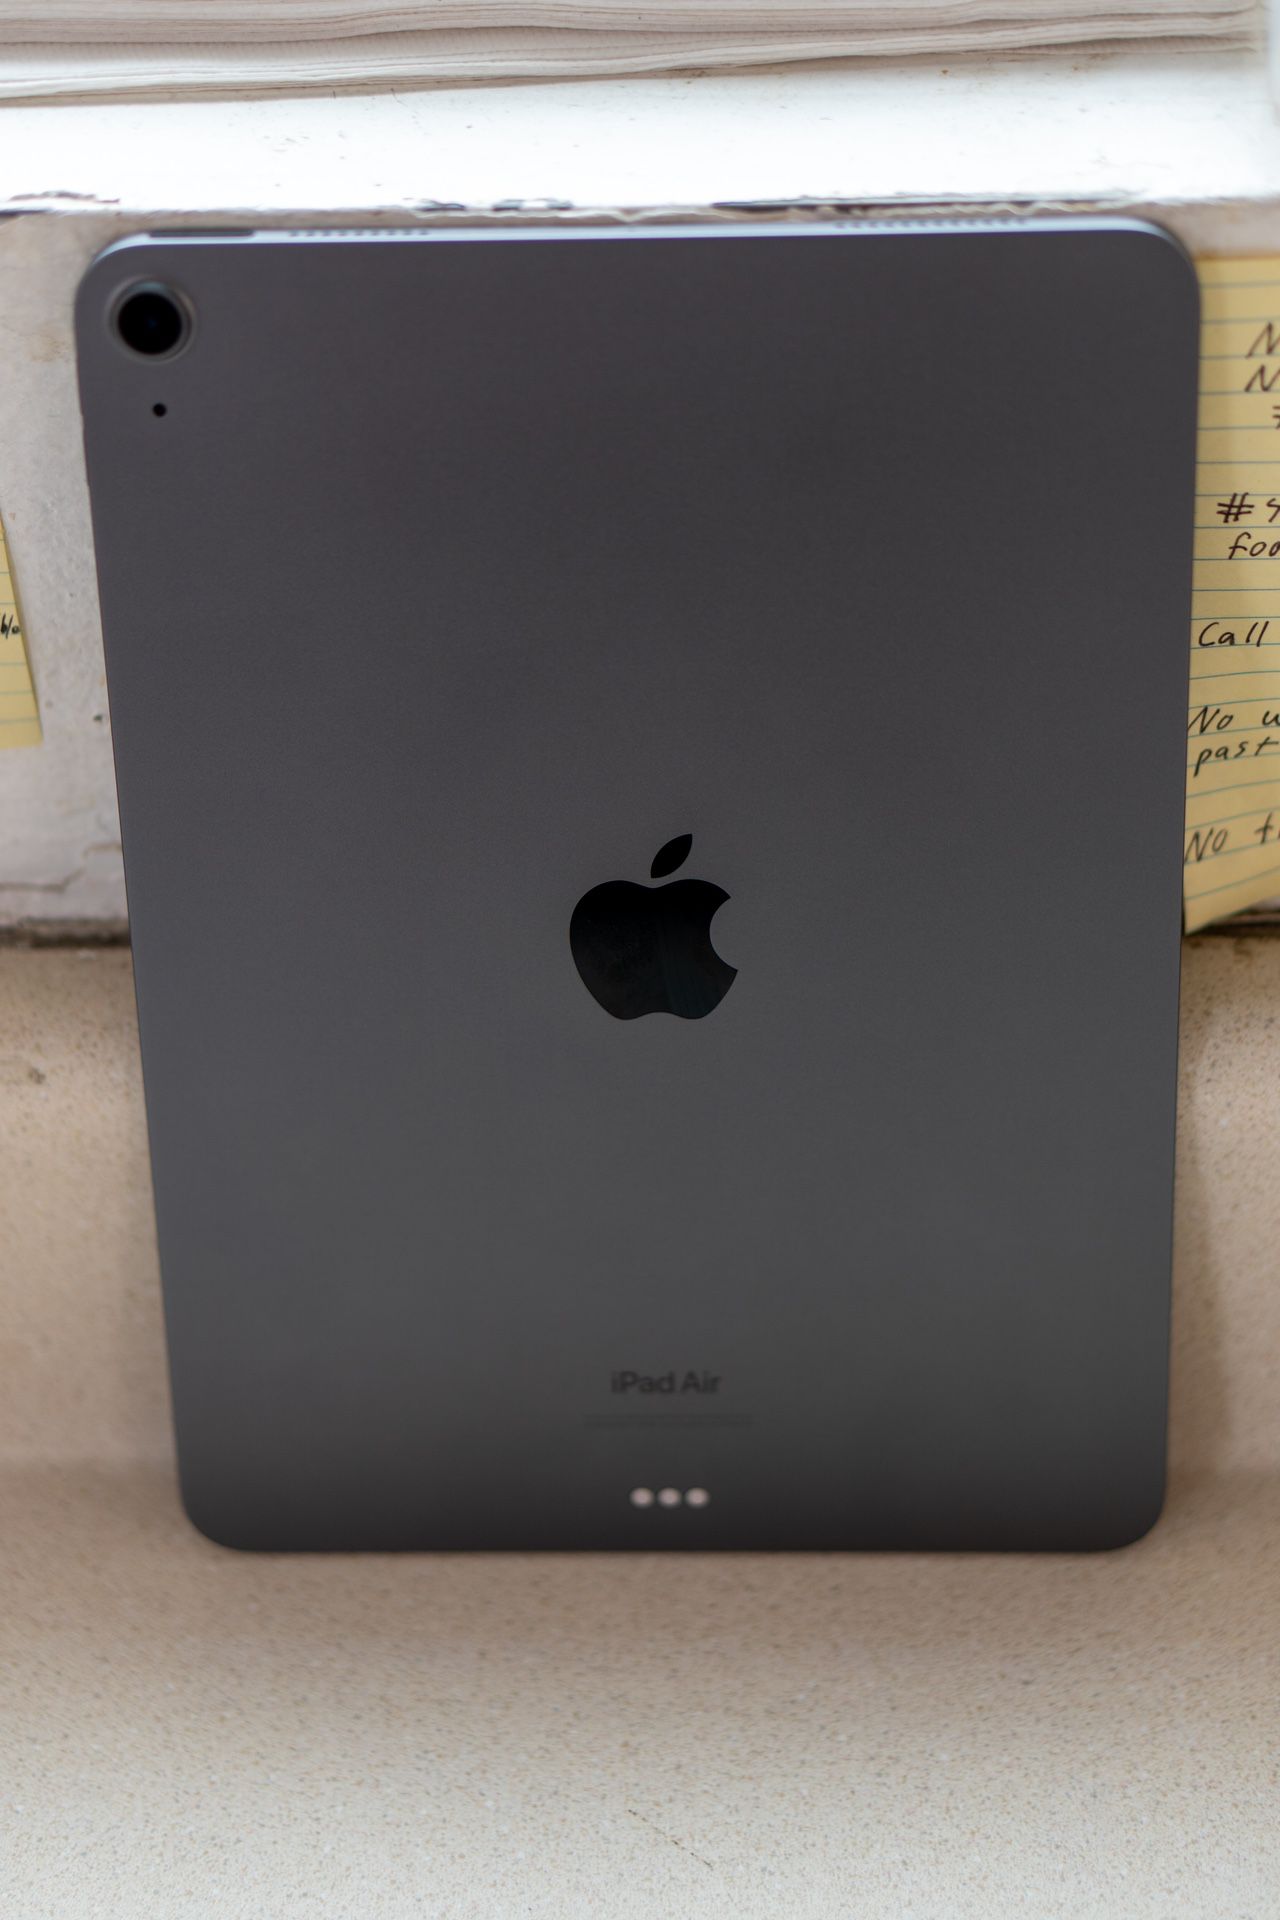 iPad Air 5th Gen 64GB for Sale in Los Angeles, CA - OfferUp